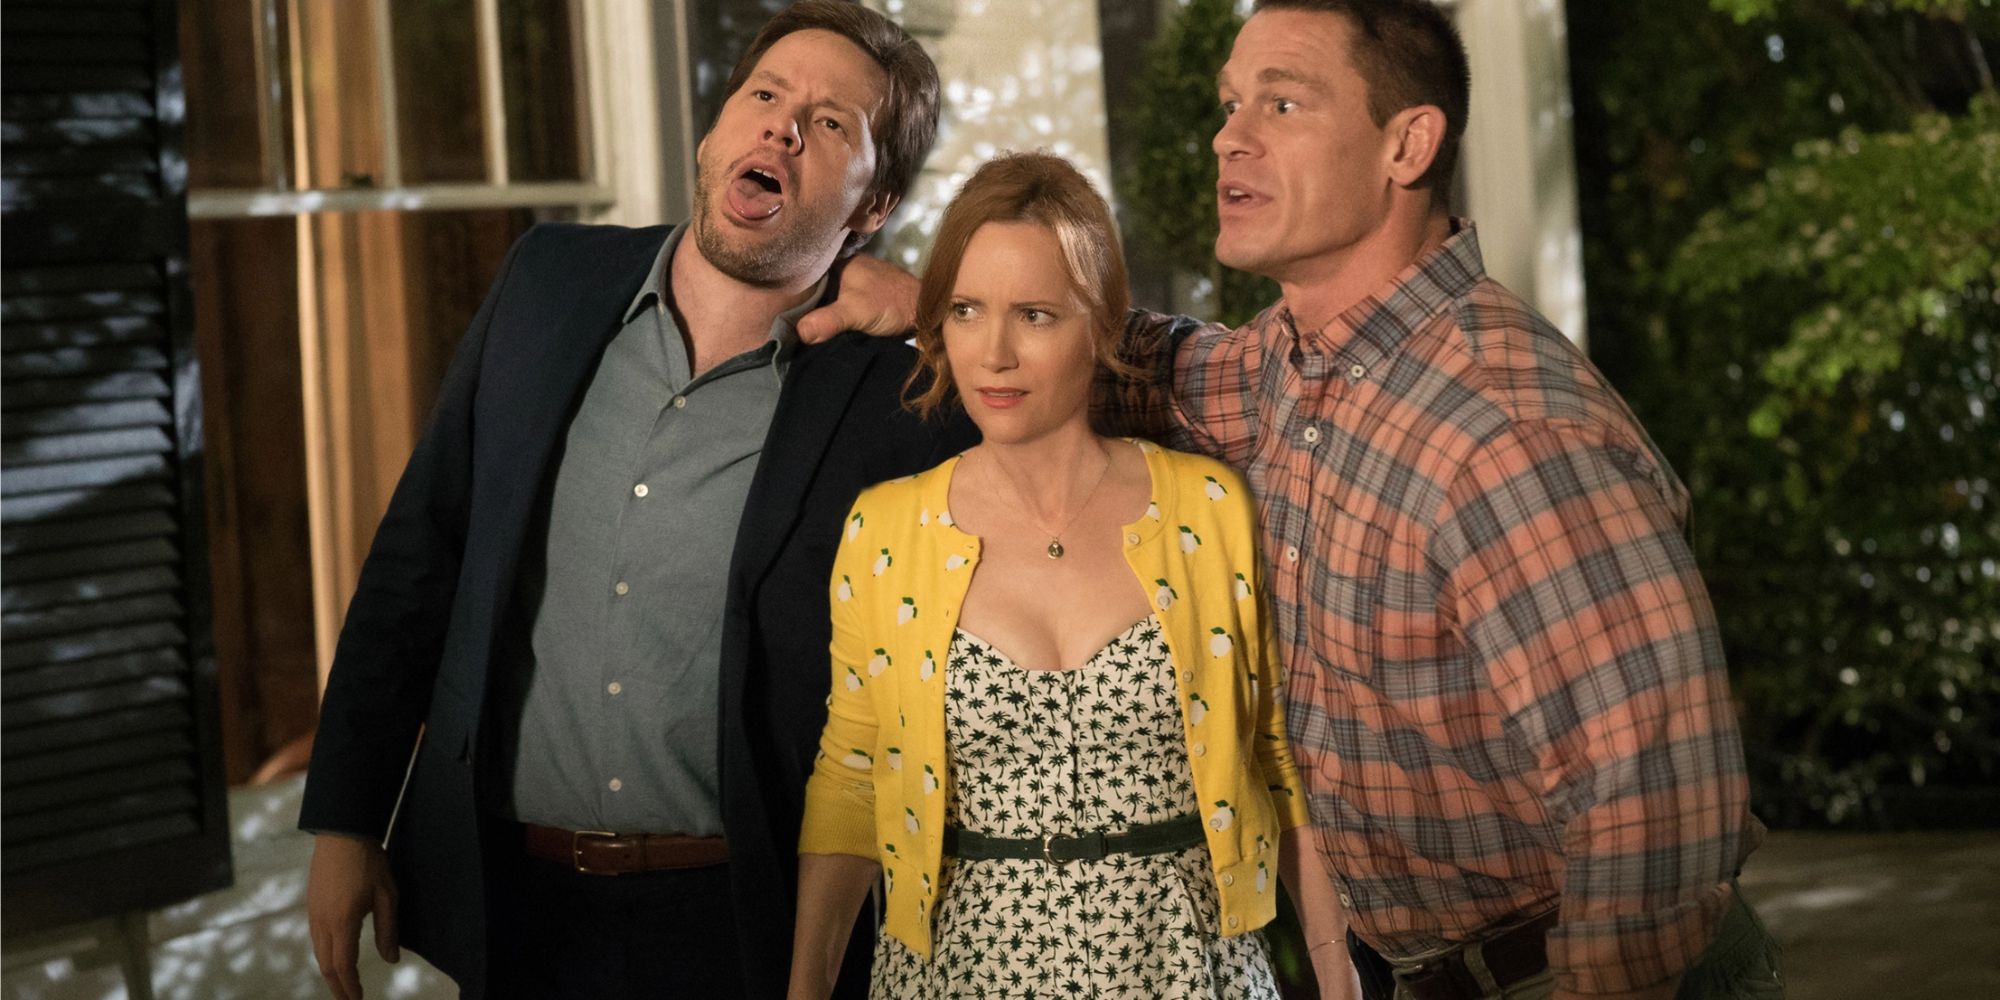 Ike Barinholtz, Leslie Mann and John Cena holding each other and looking confused